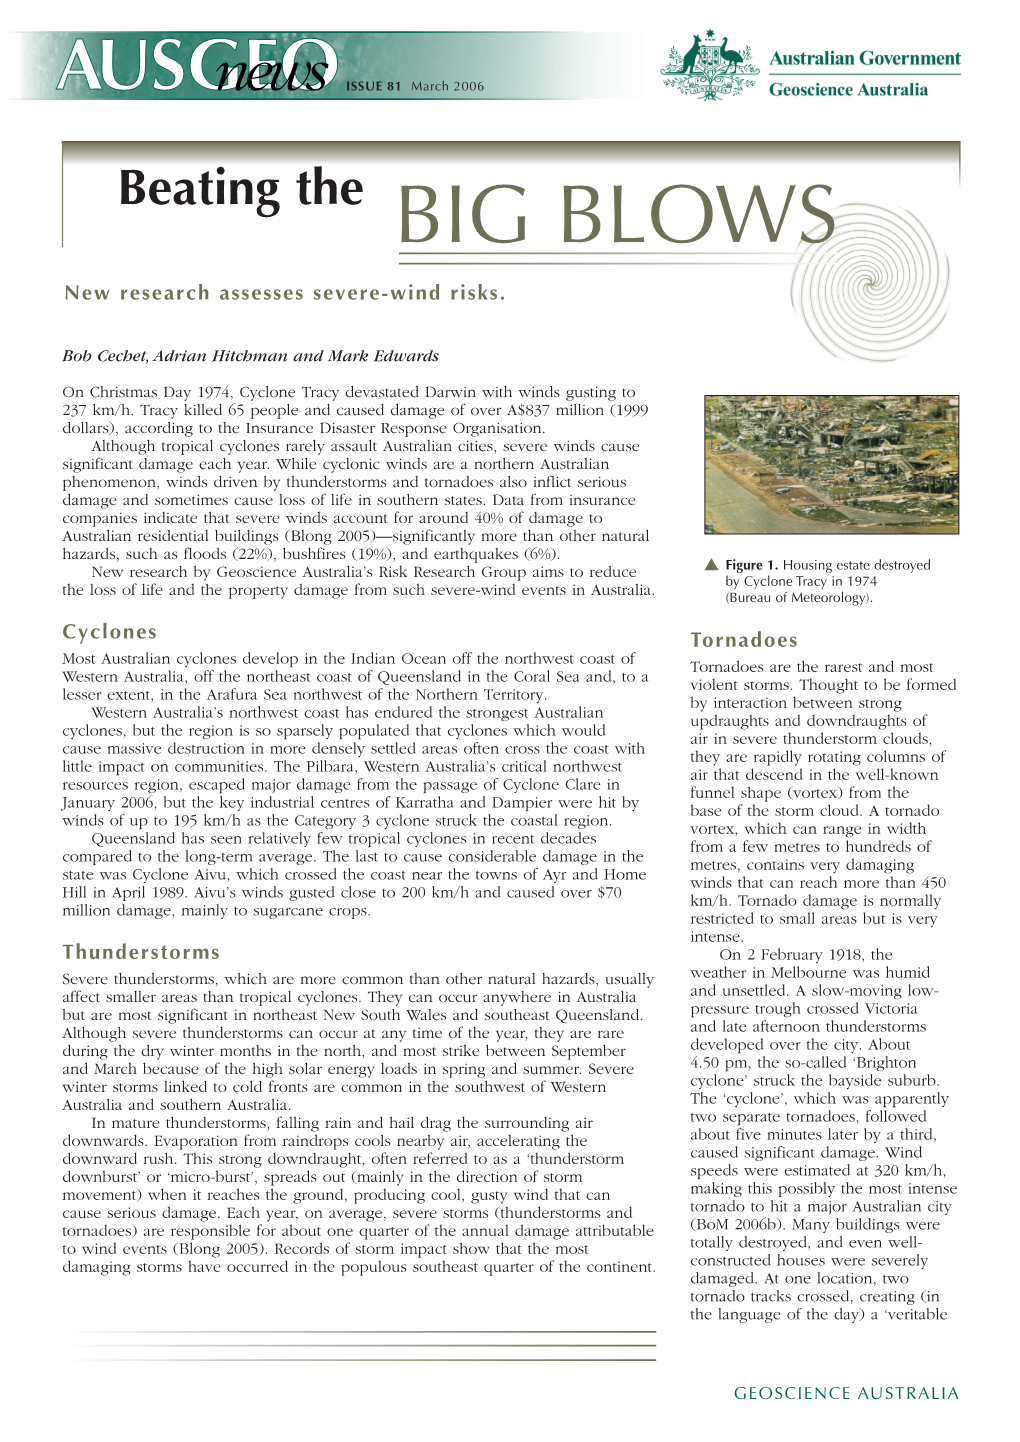 BIG BLOWS New Research Assesses Severe-Wind Risks